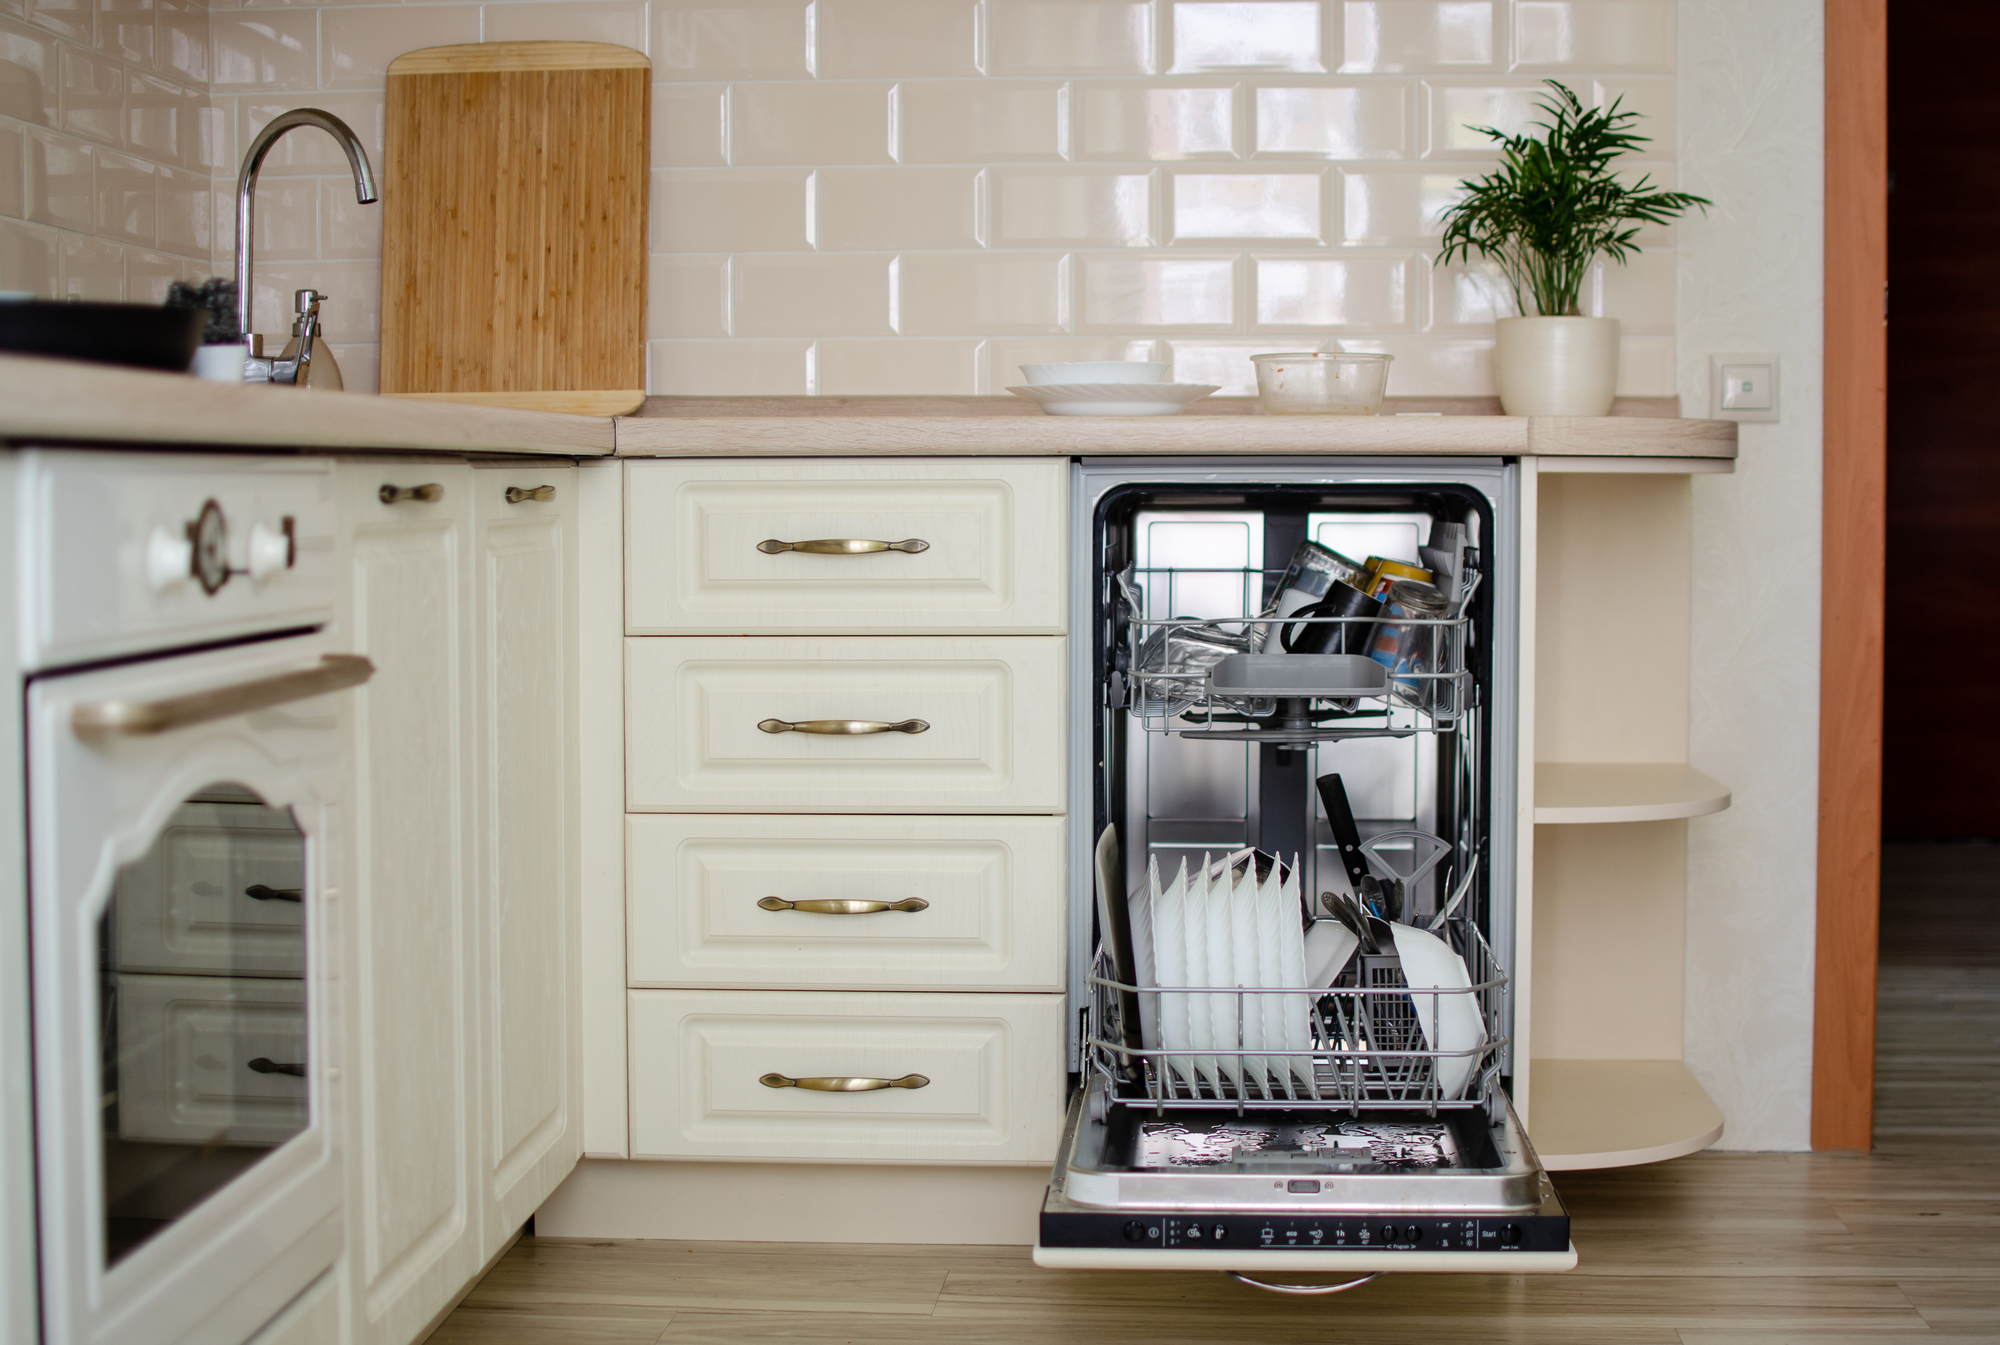 10 Things That Should Never Go Inside of a Dishwasher